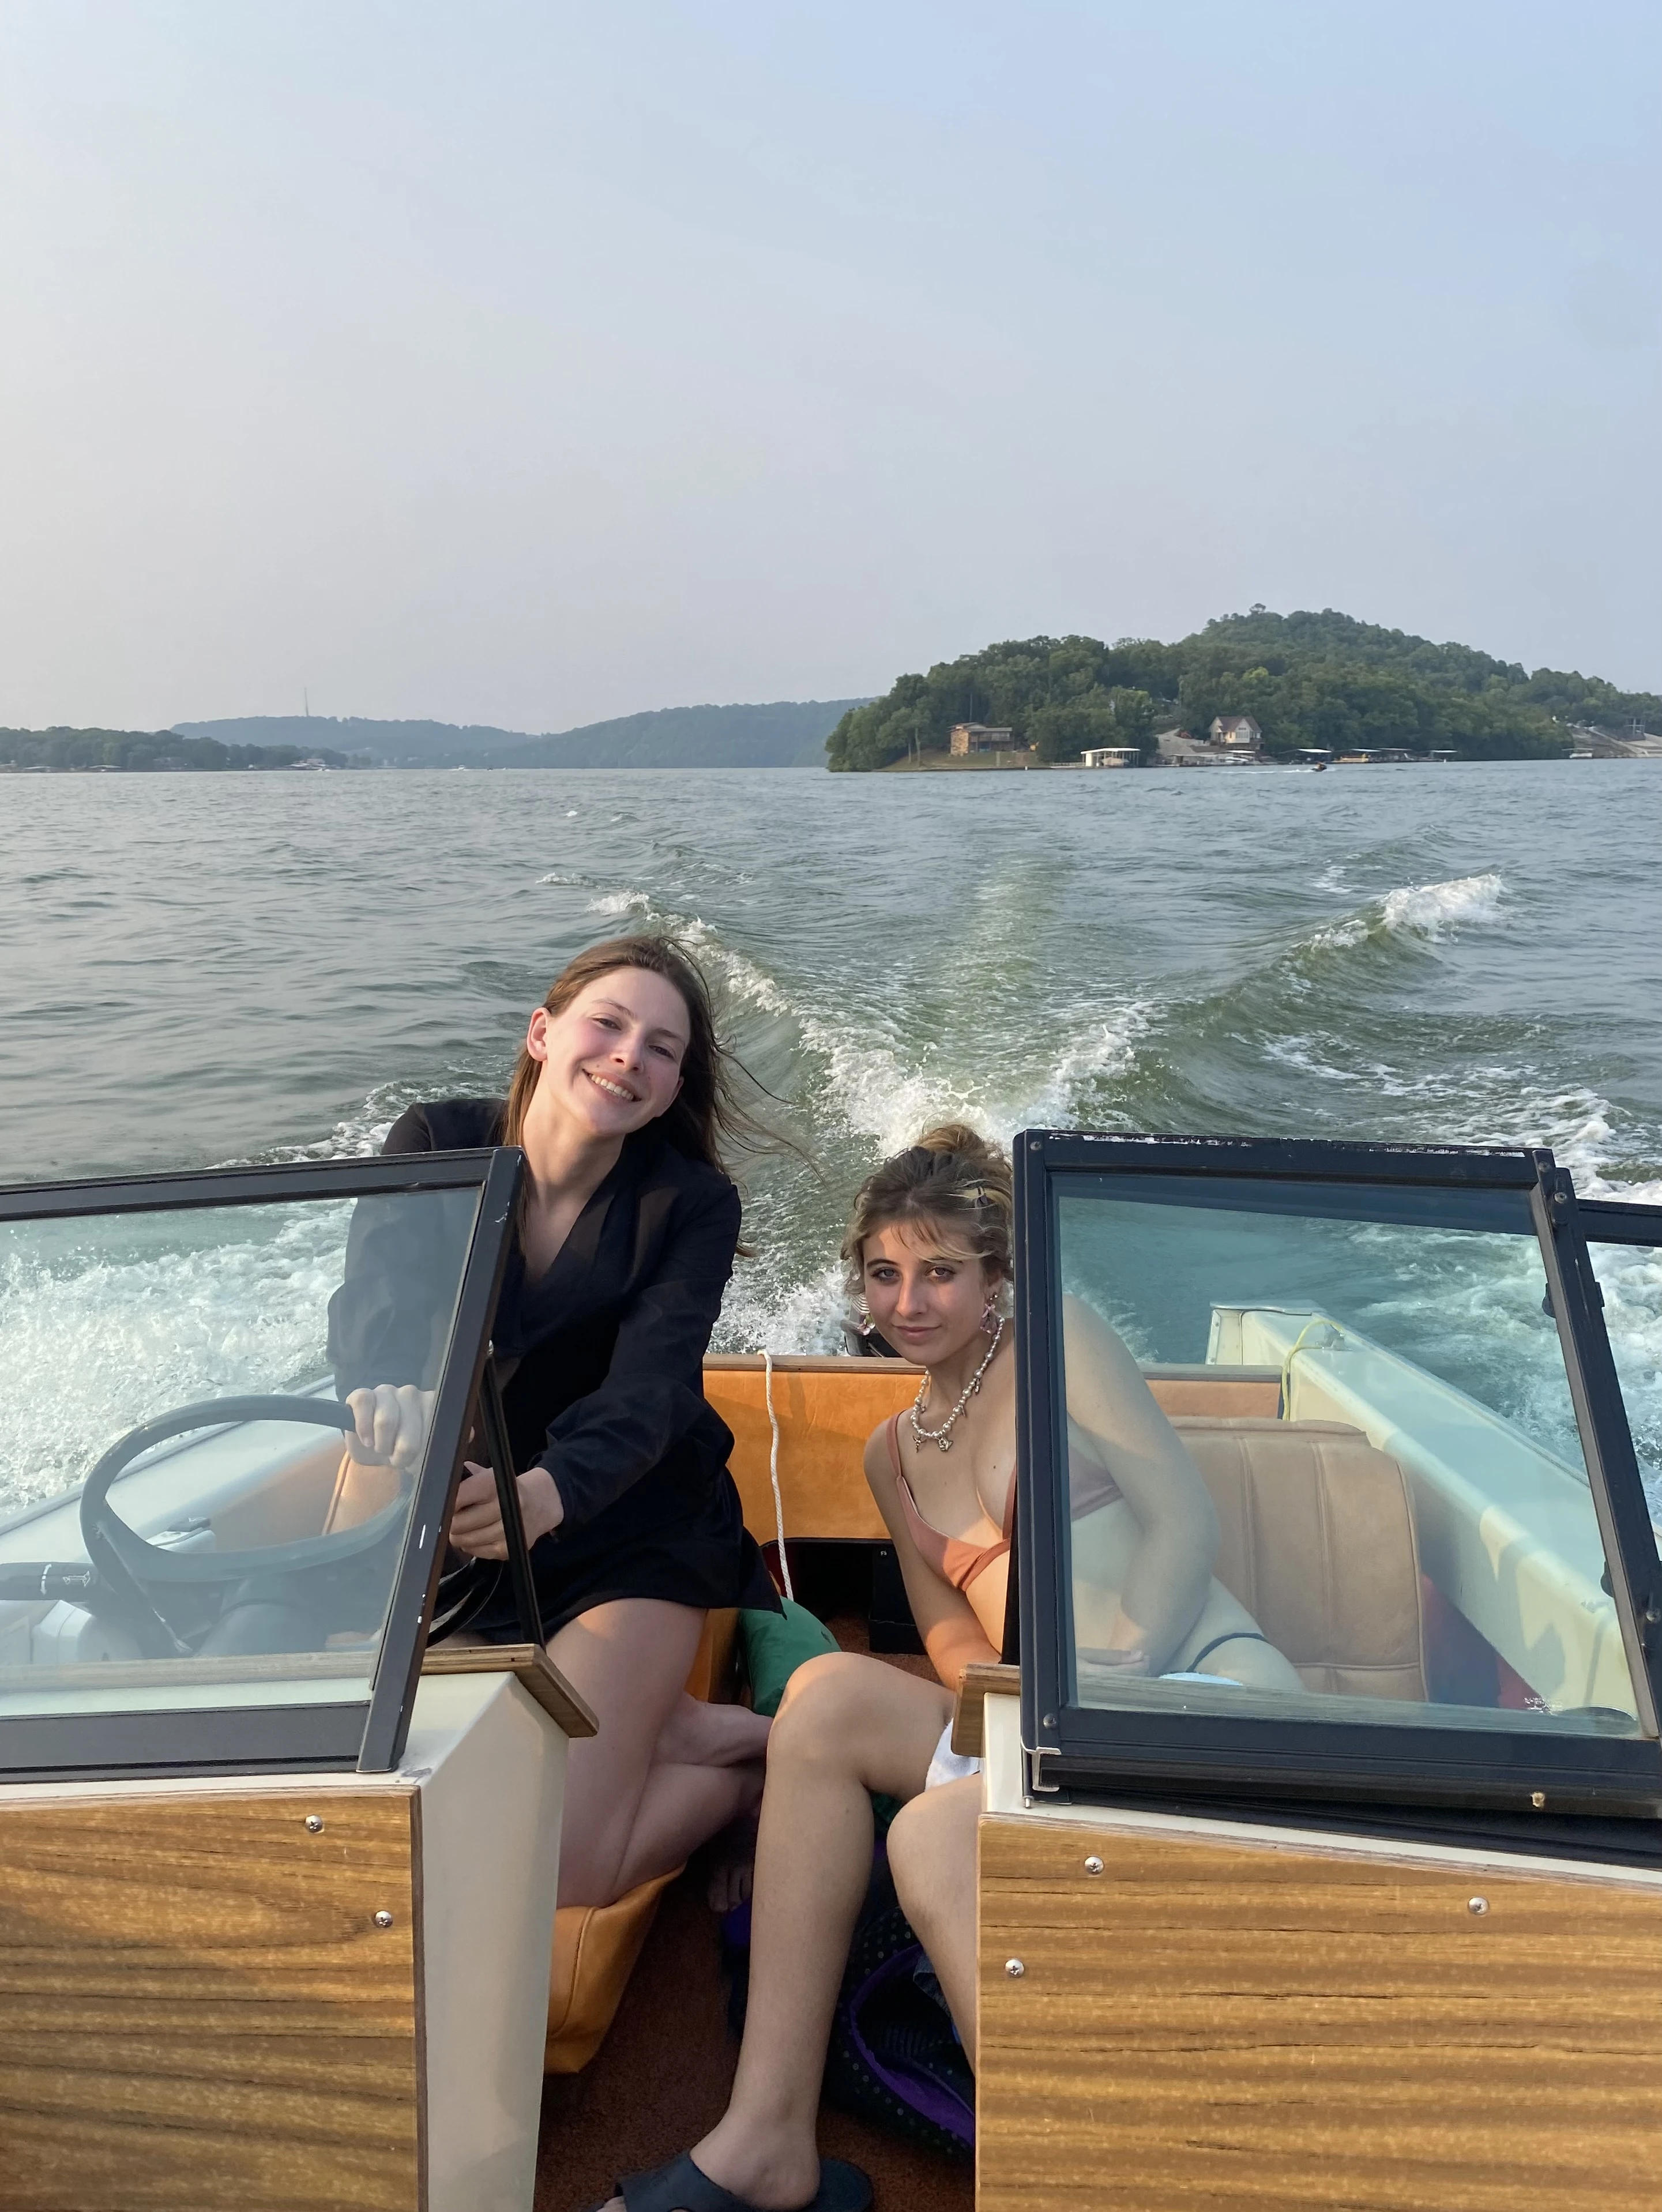 My girlfriend and my close friend Katie (who I met at university!) on a boat